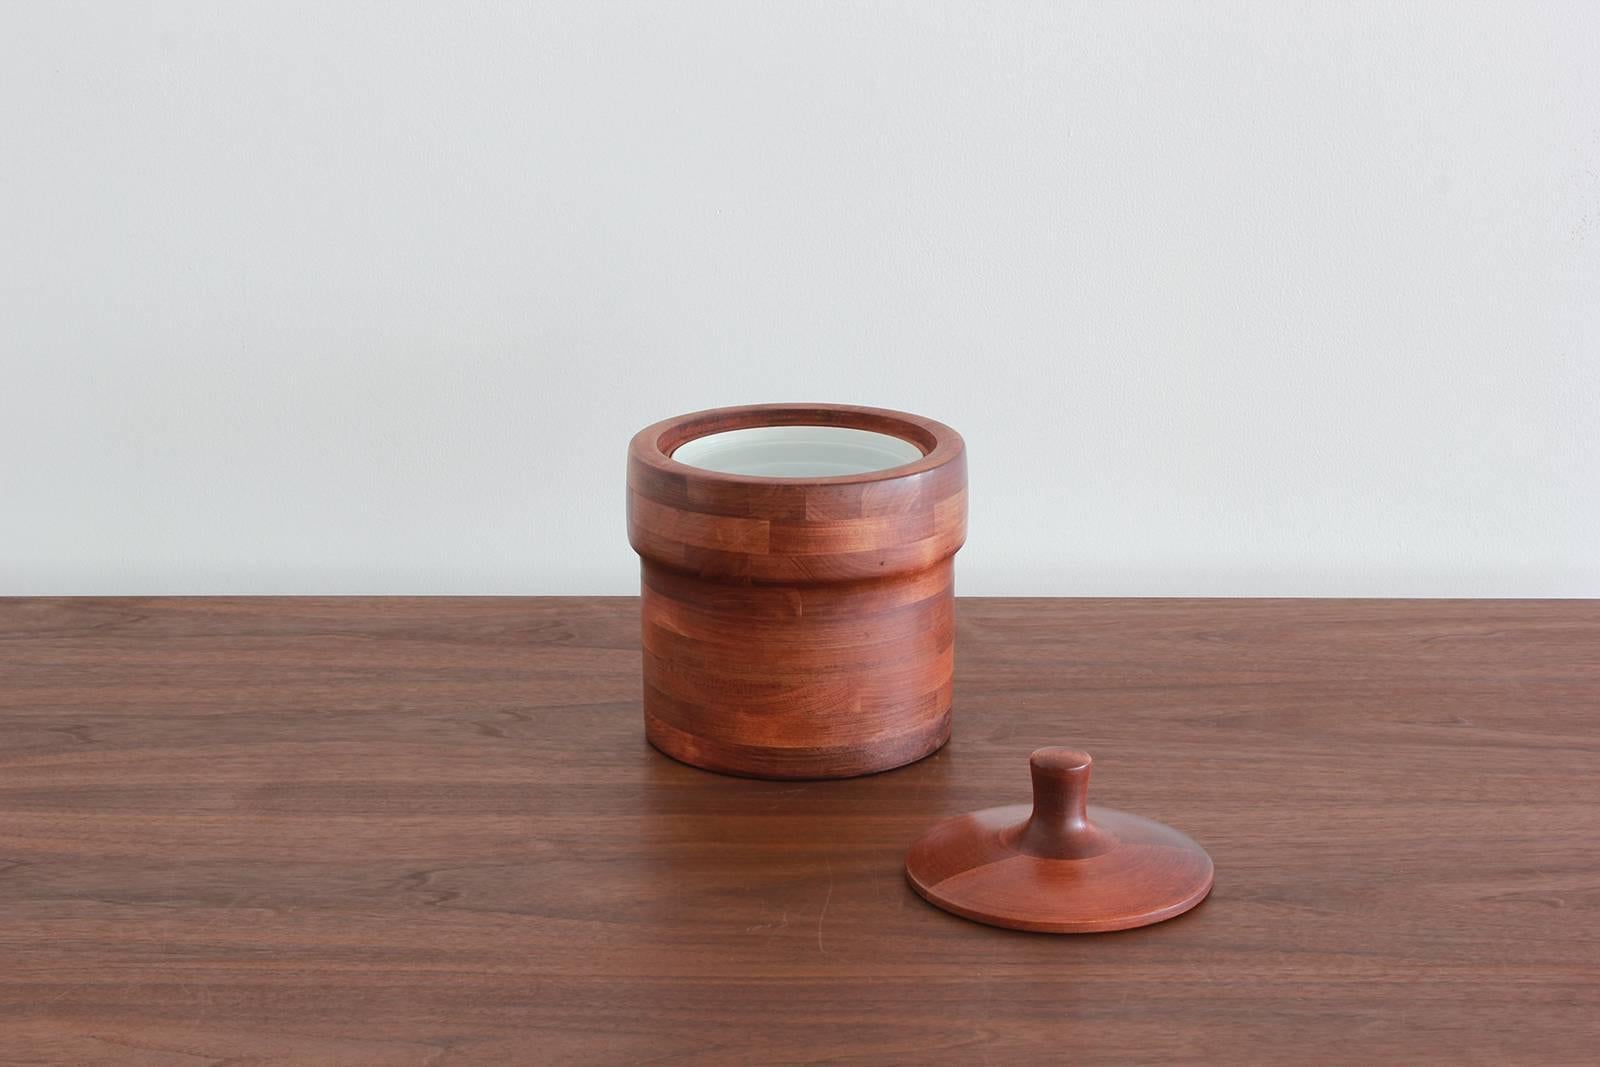 Using Canadian woods and employing the skills of Canadian artisans, the quality and style of Baribocraft woodenware items are still unrivaled today and are highly sought after, although the company ceased production in the 1970s. 

Teak stained